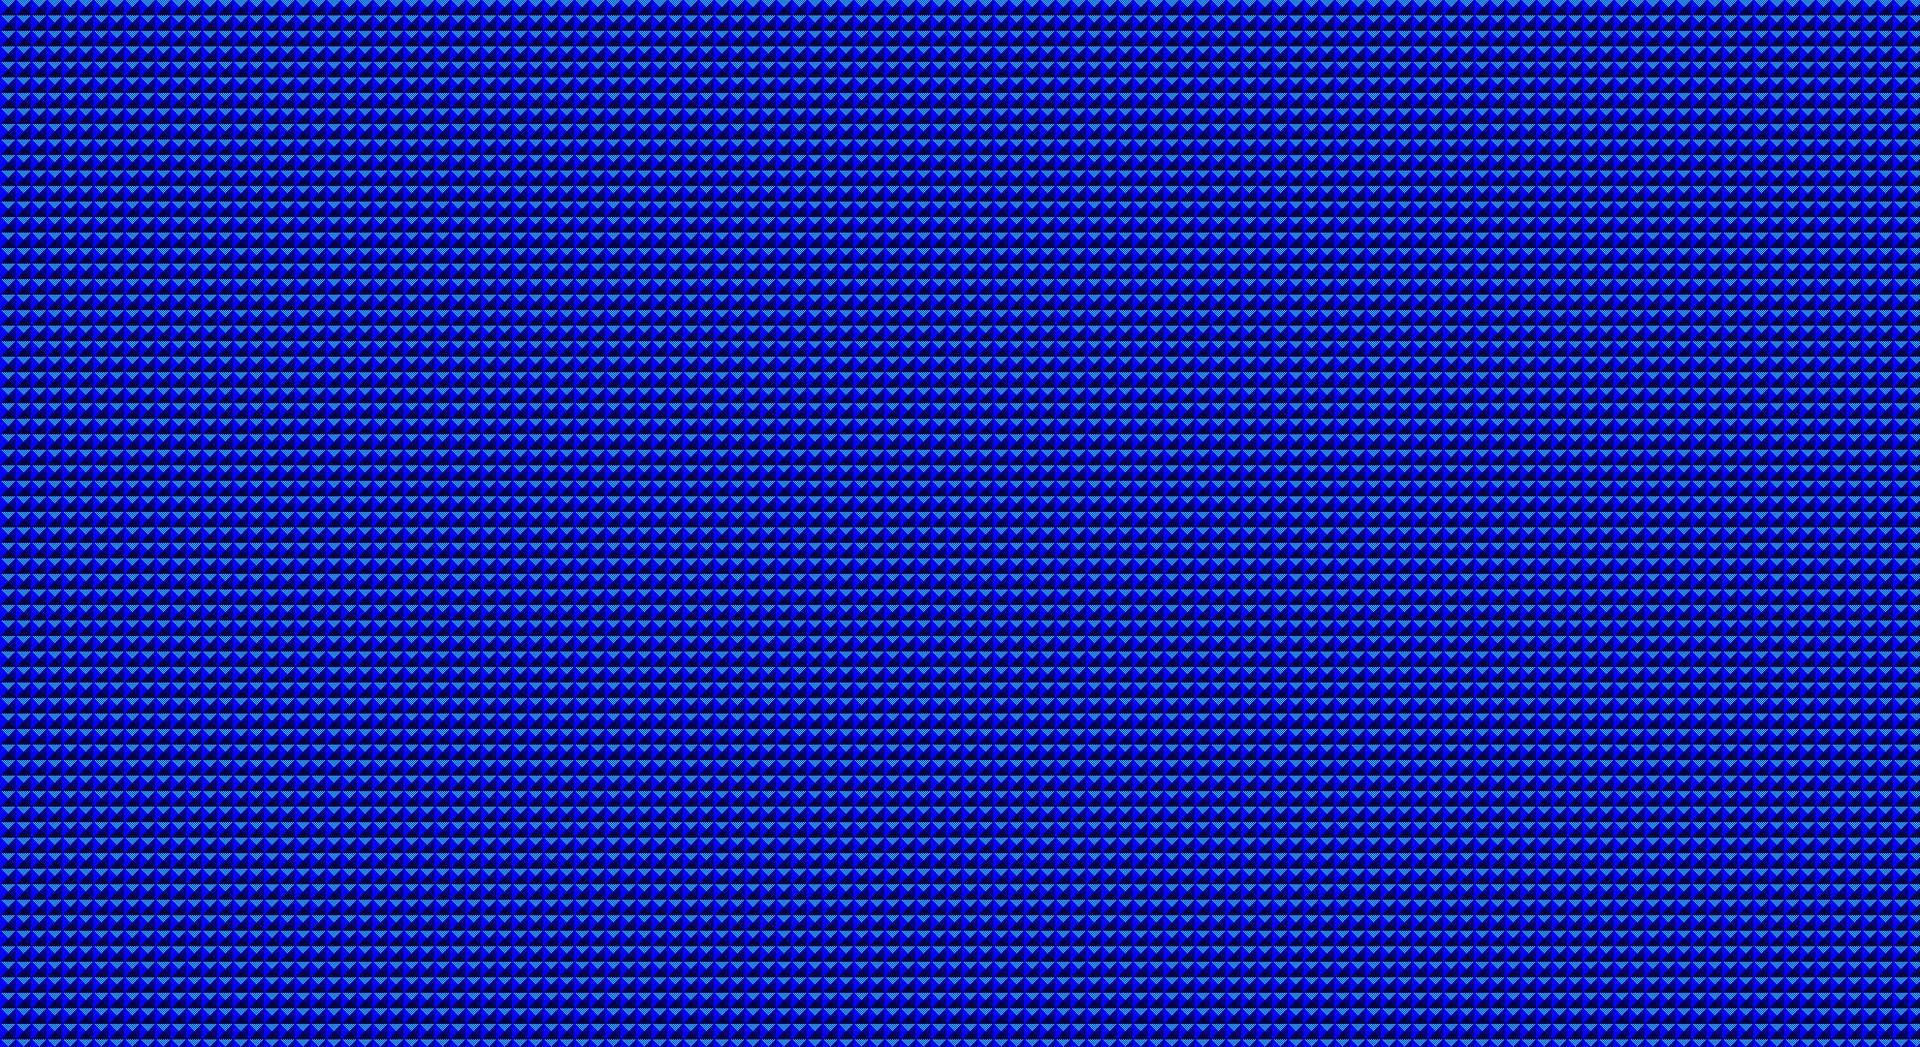 A blue background with a pattern of dots. - Windows 95, Windows 98